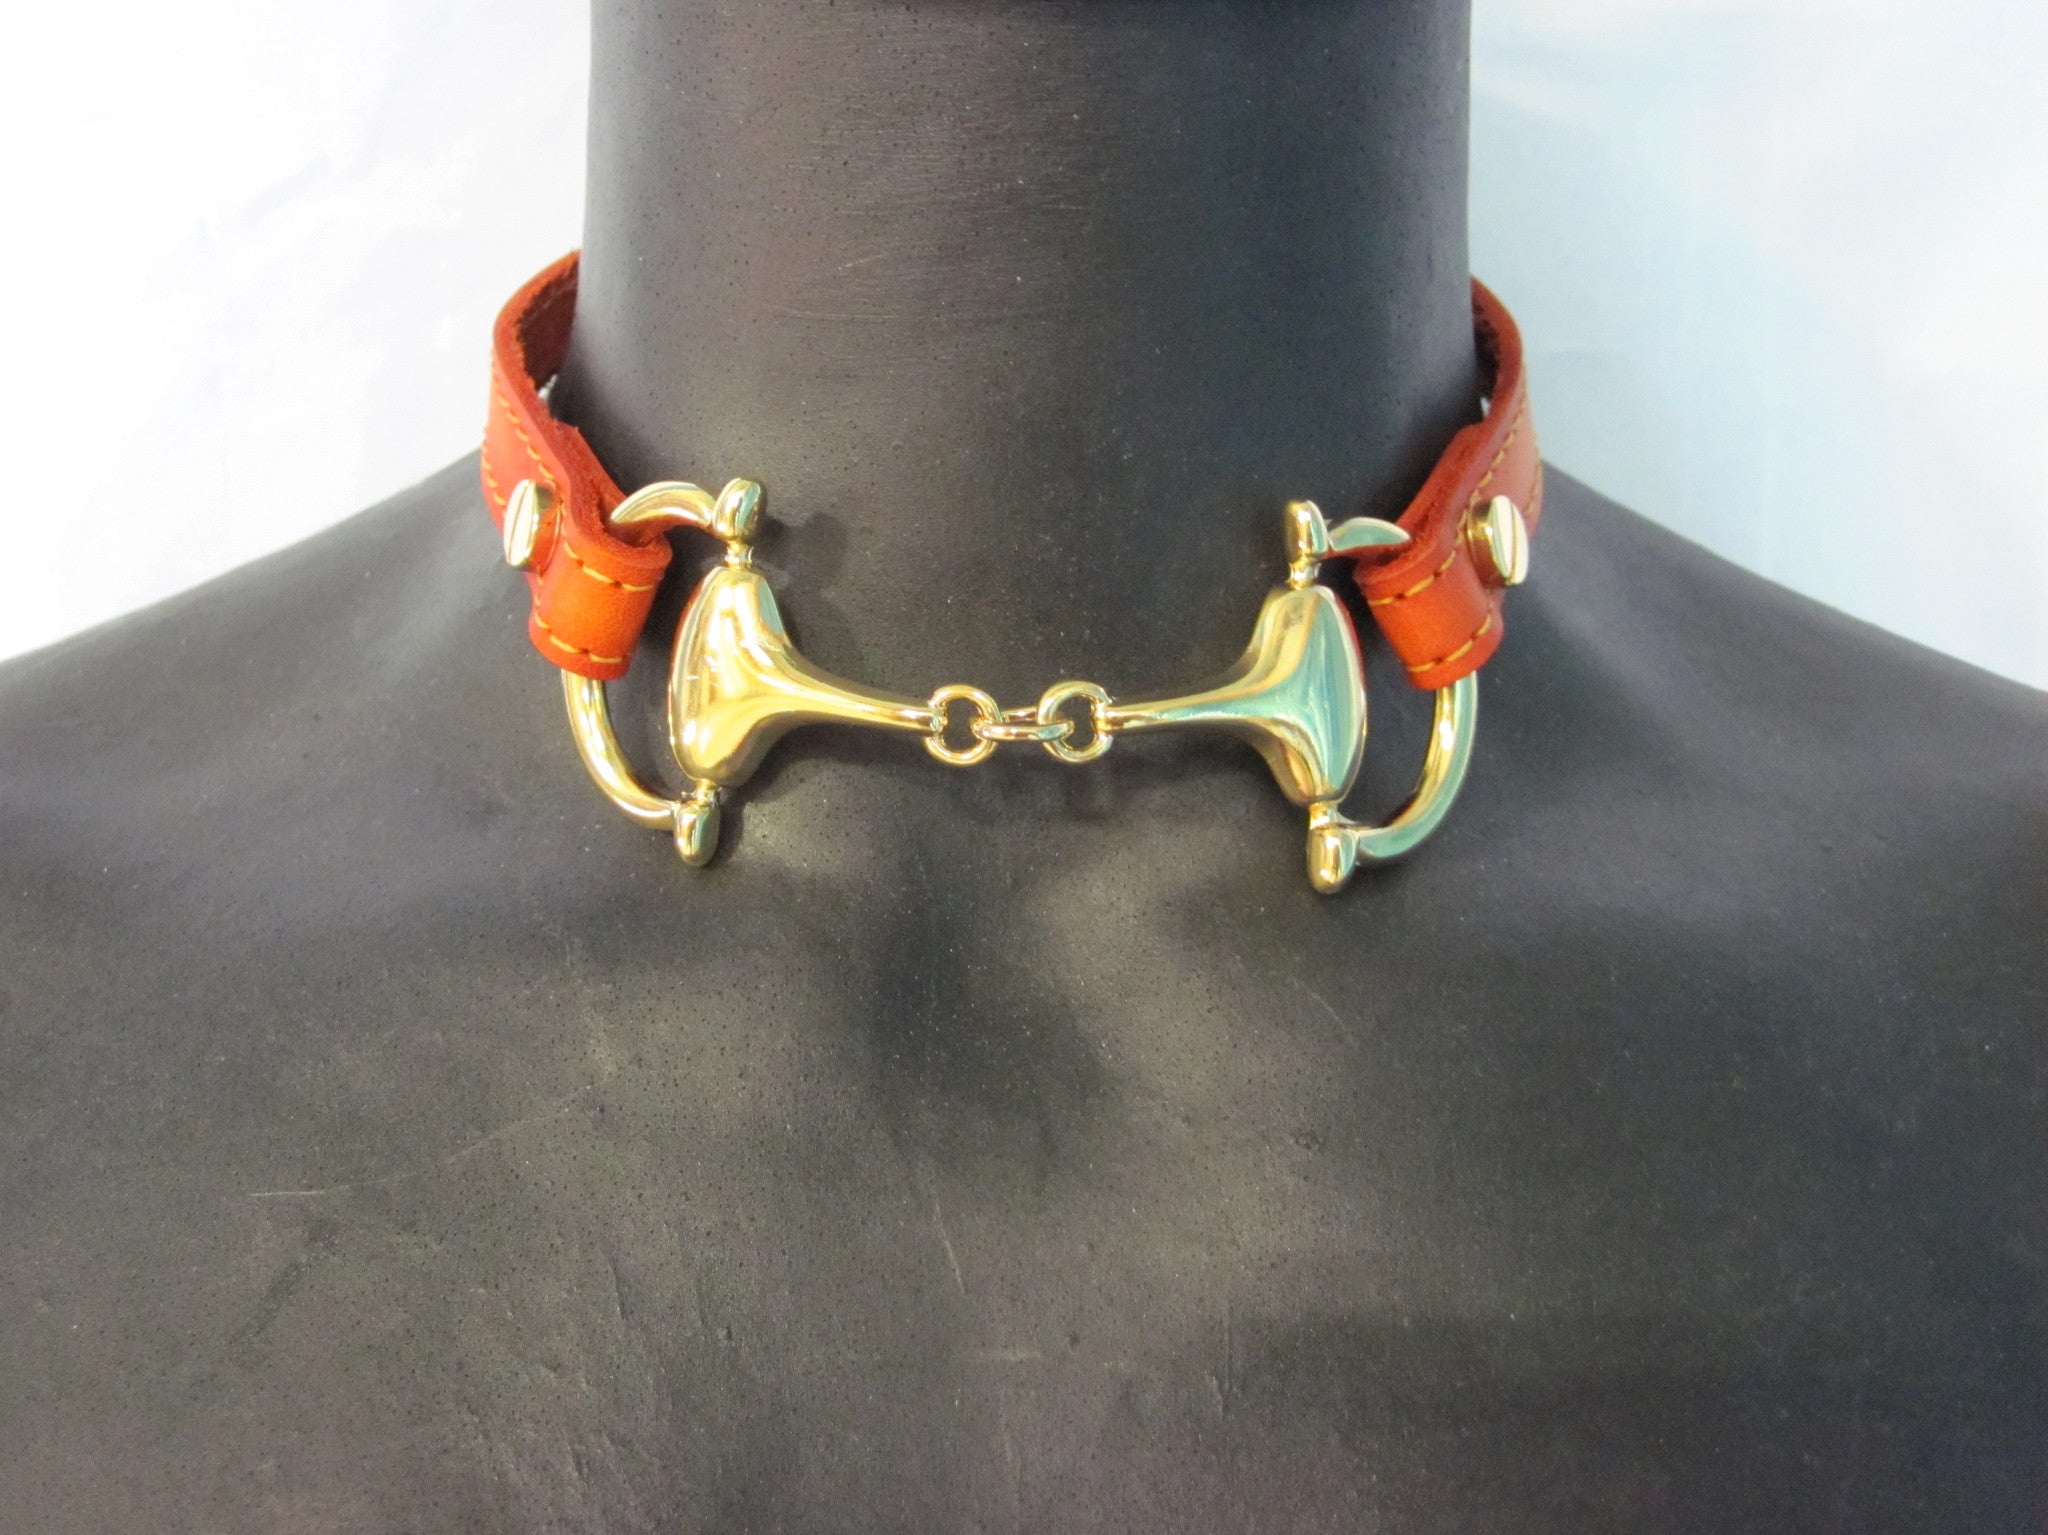 LEATHER CHOKER NECKLACE WITH D-RING HORSE BIT PENDANT